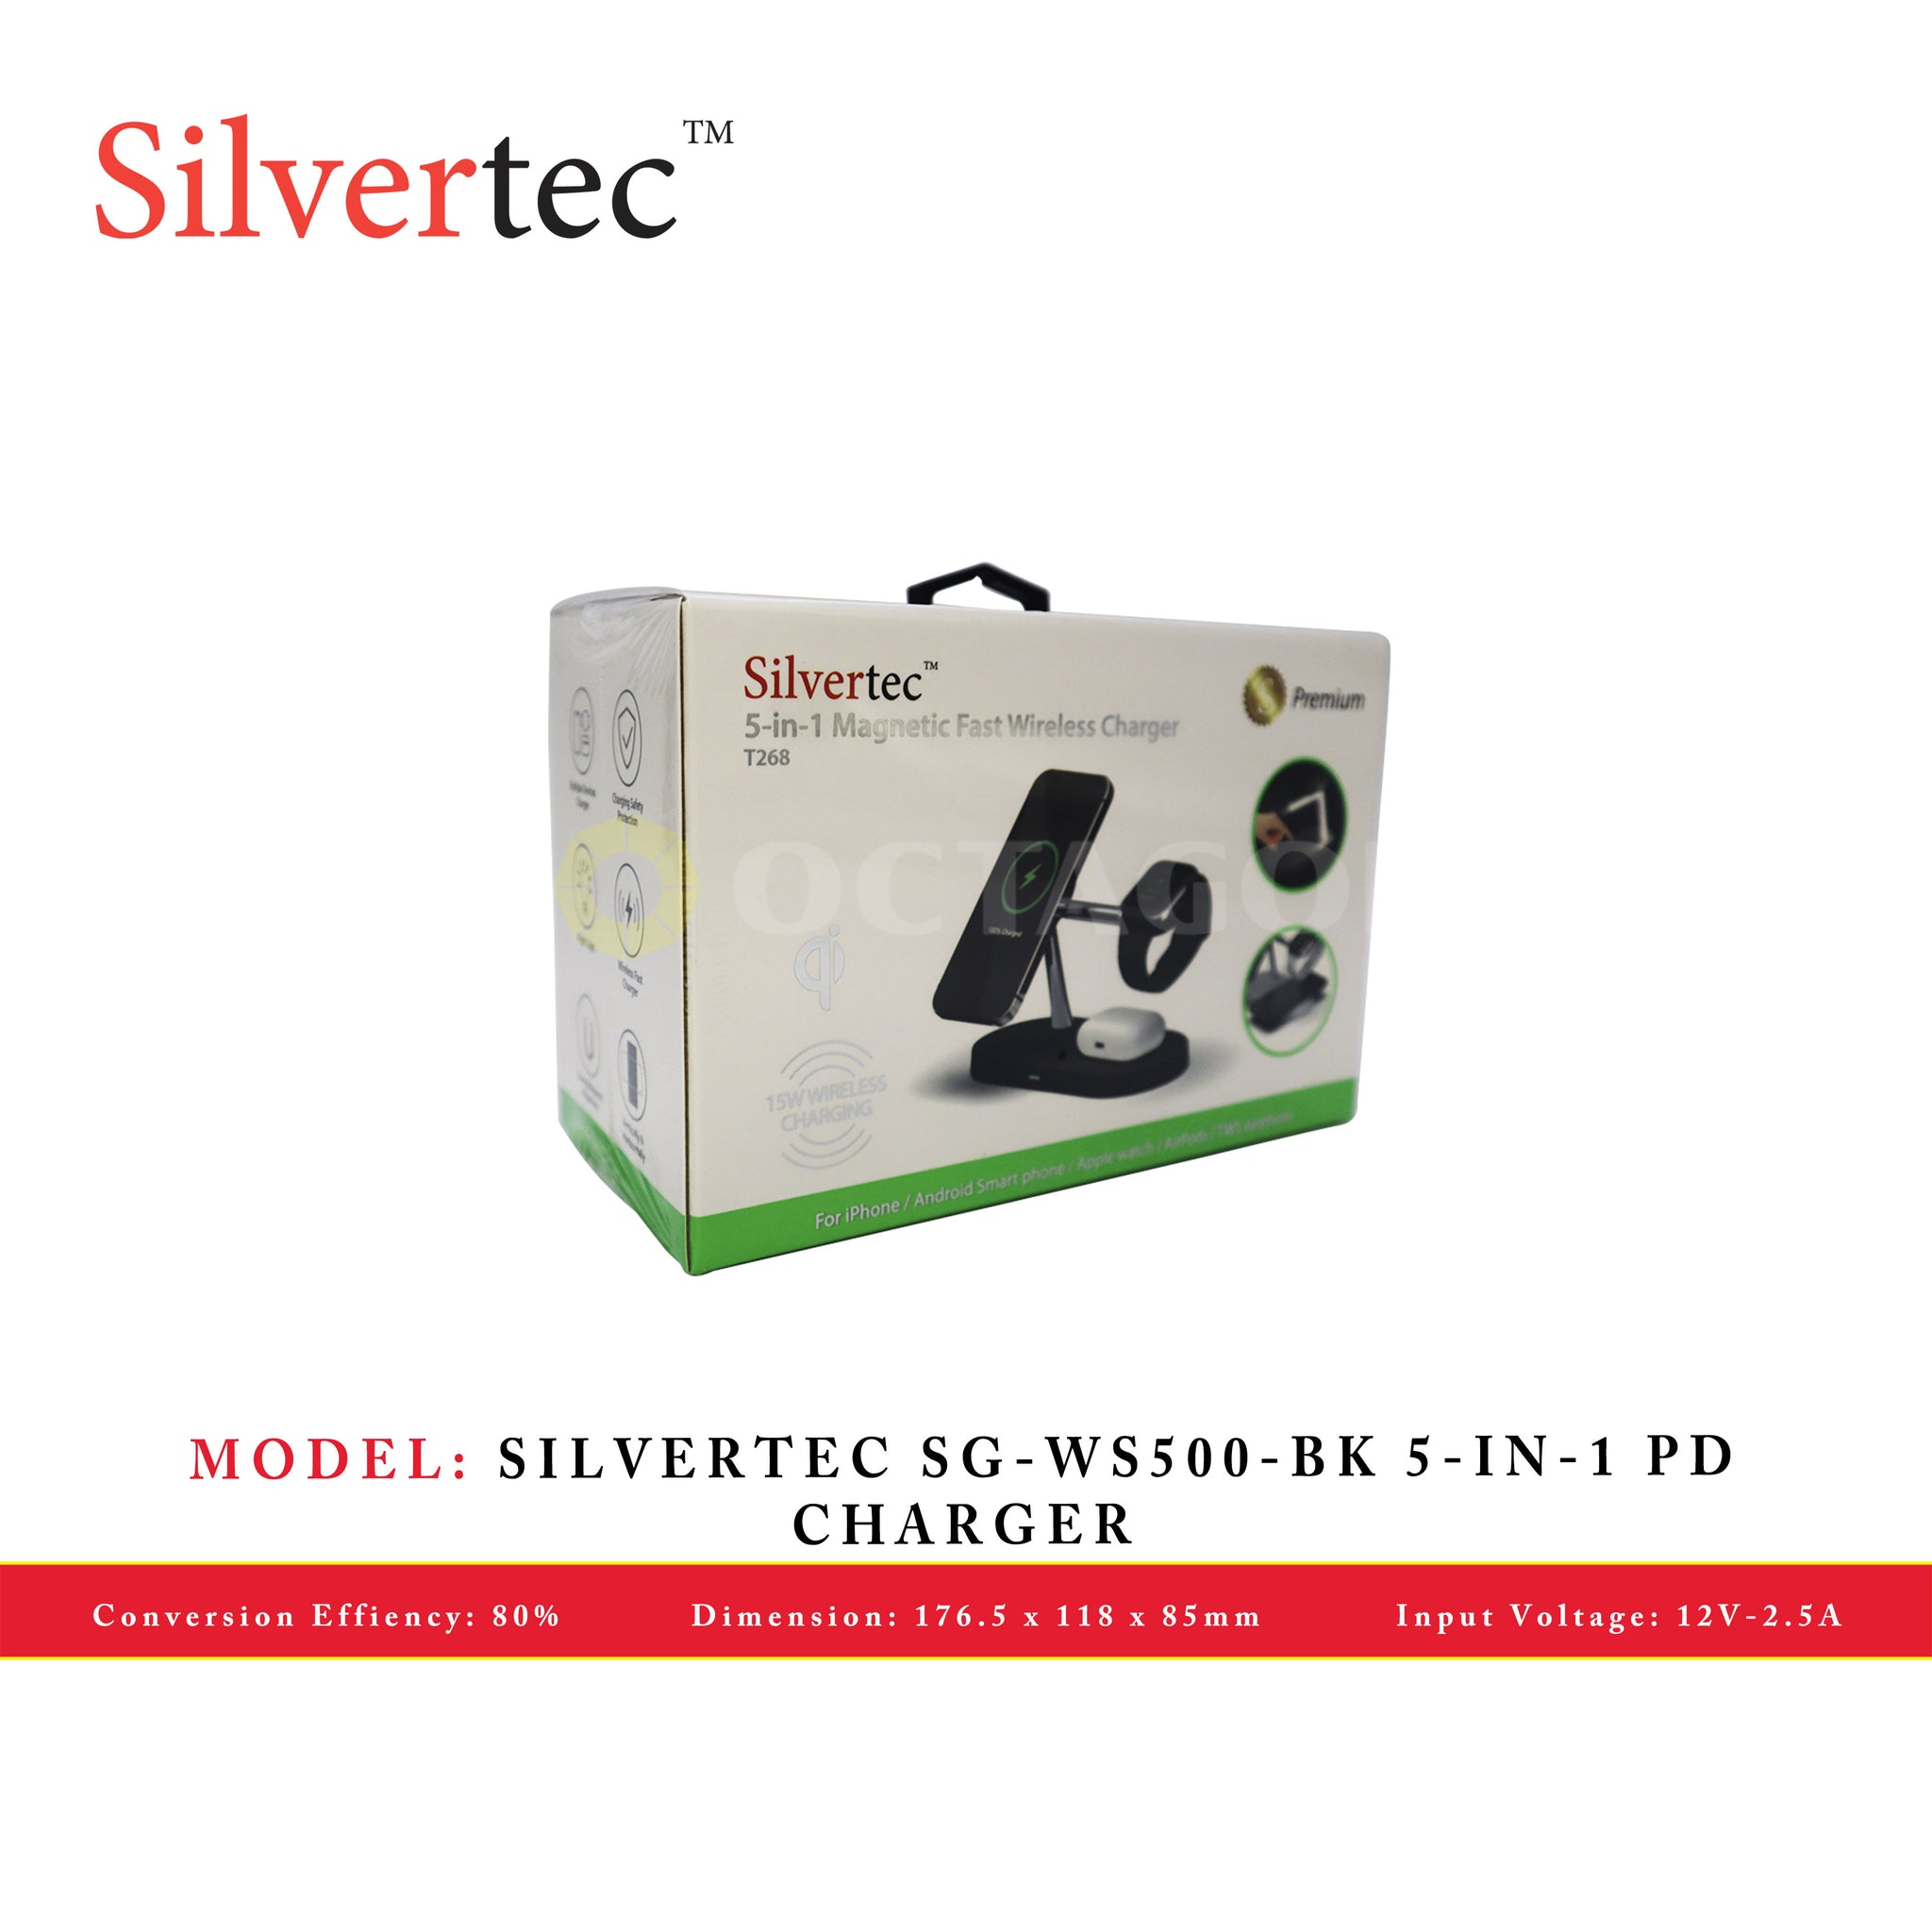 SILVERTEC SG-WS500-BK 5-IN-1 PD CHARGER